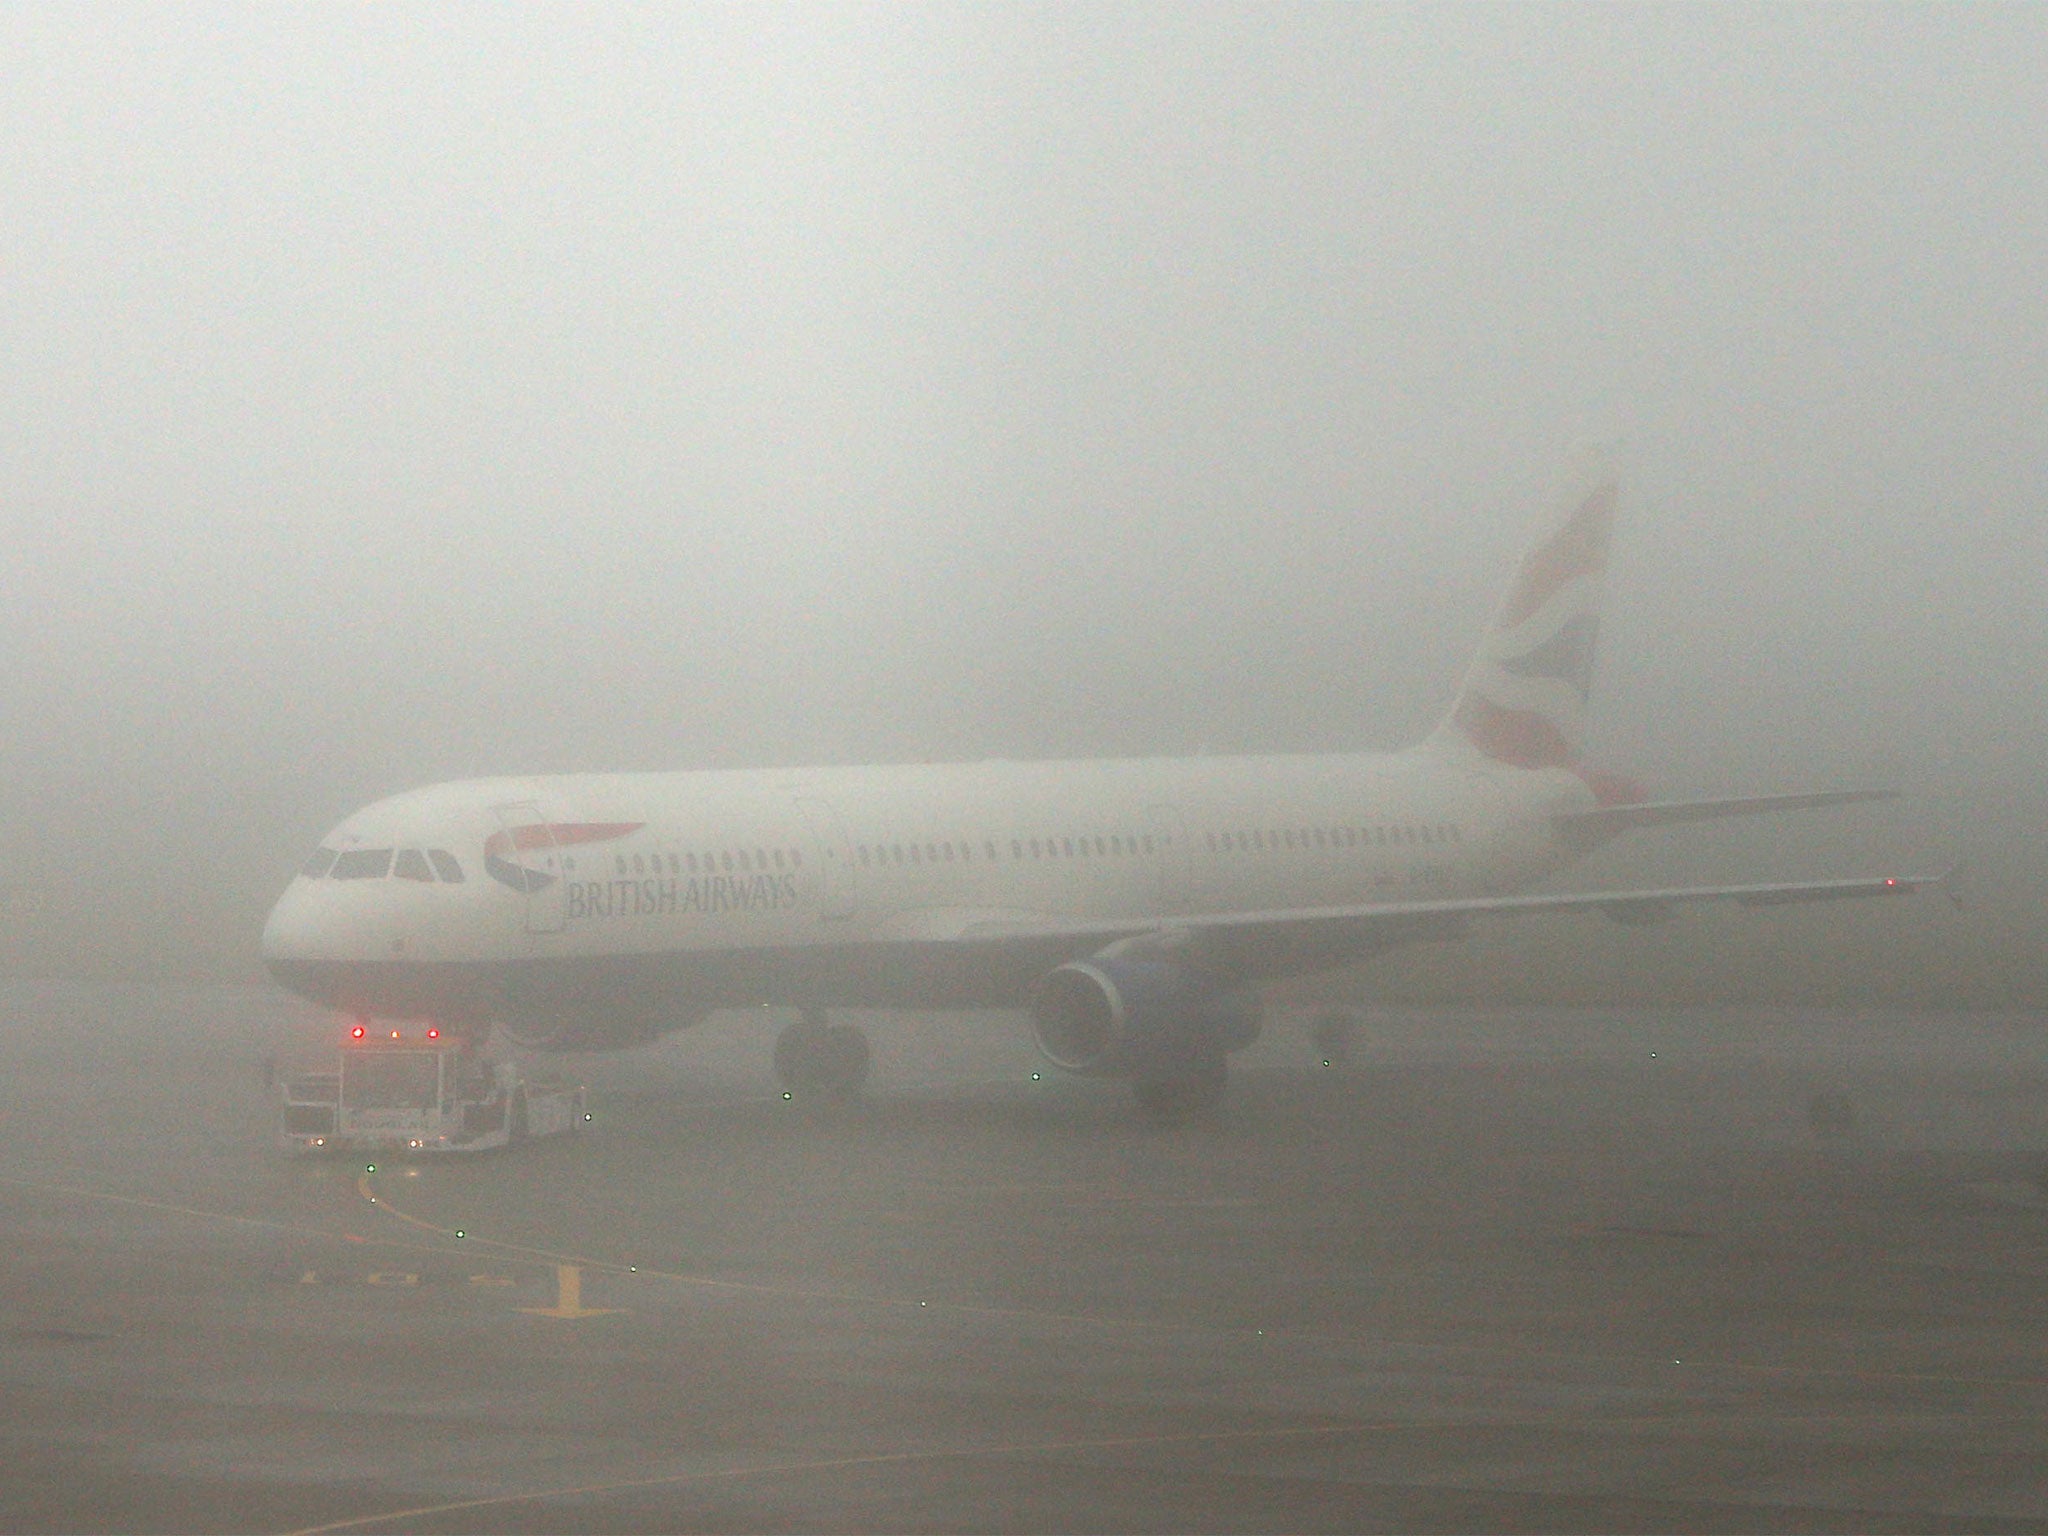 The fog caused havoc at Heathrow yesterday, grounding more than 100 flights